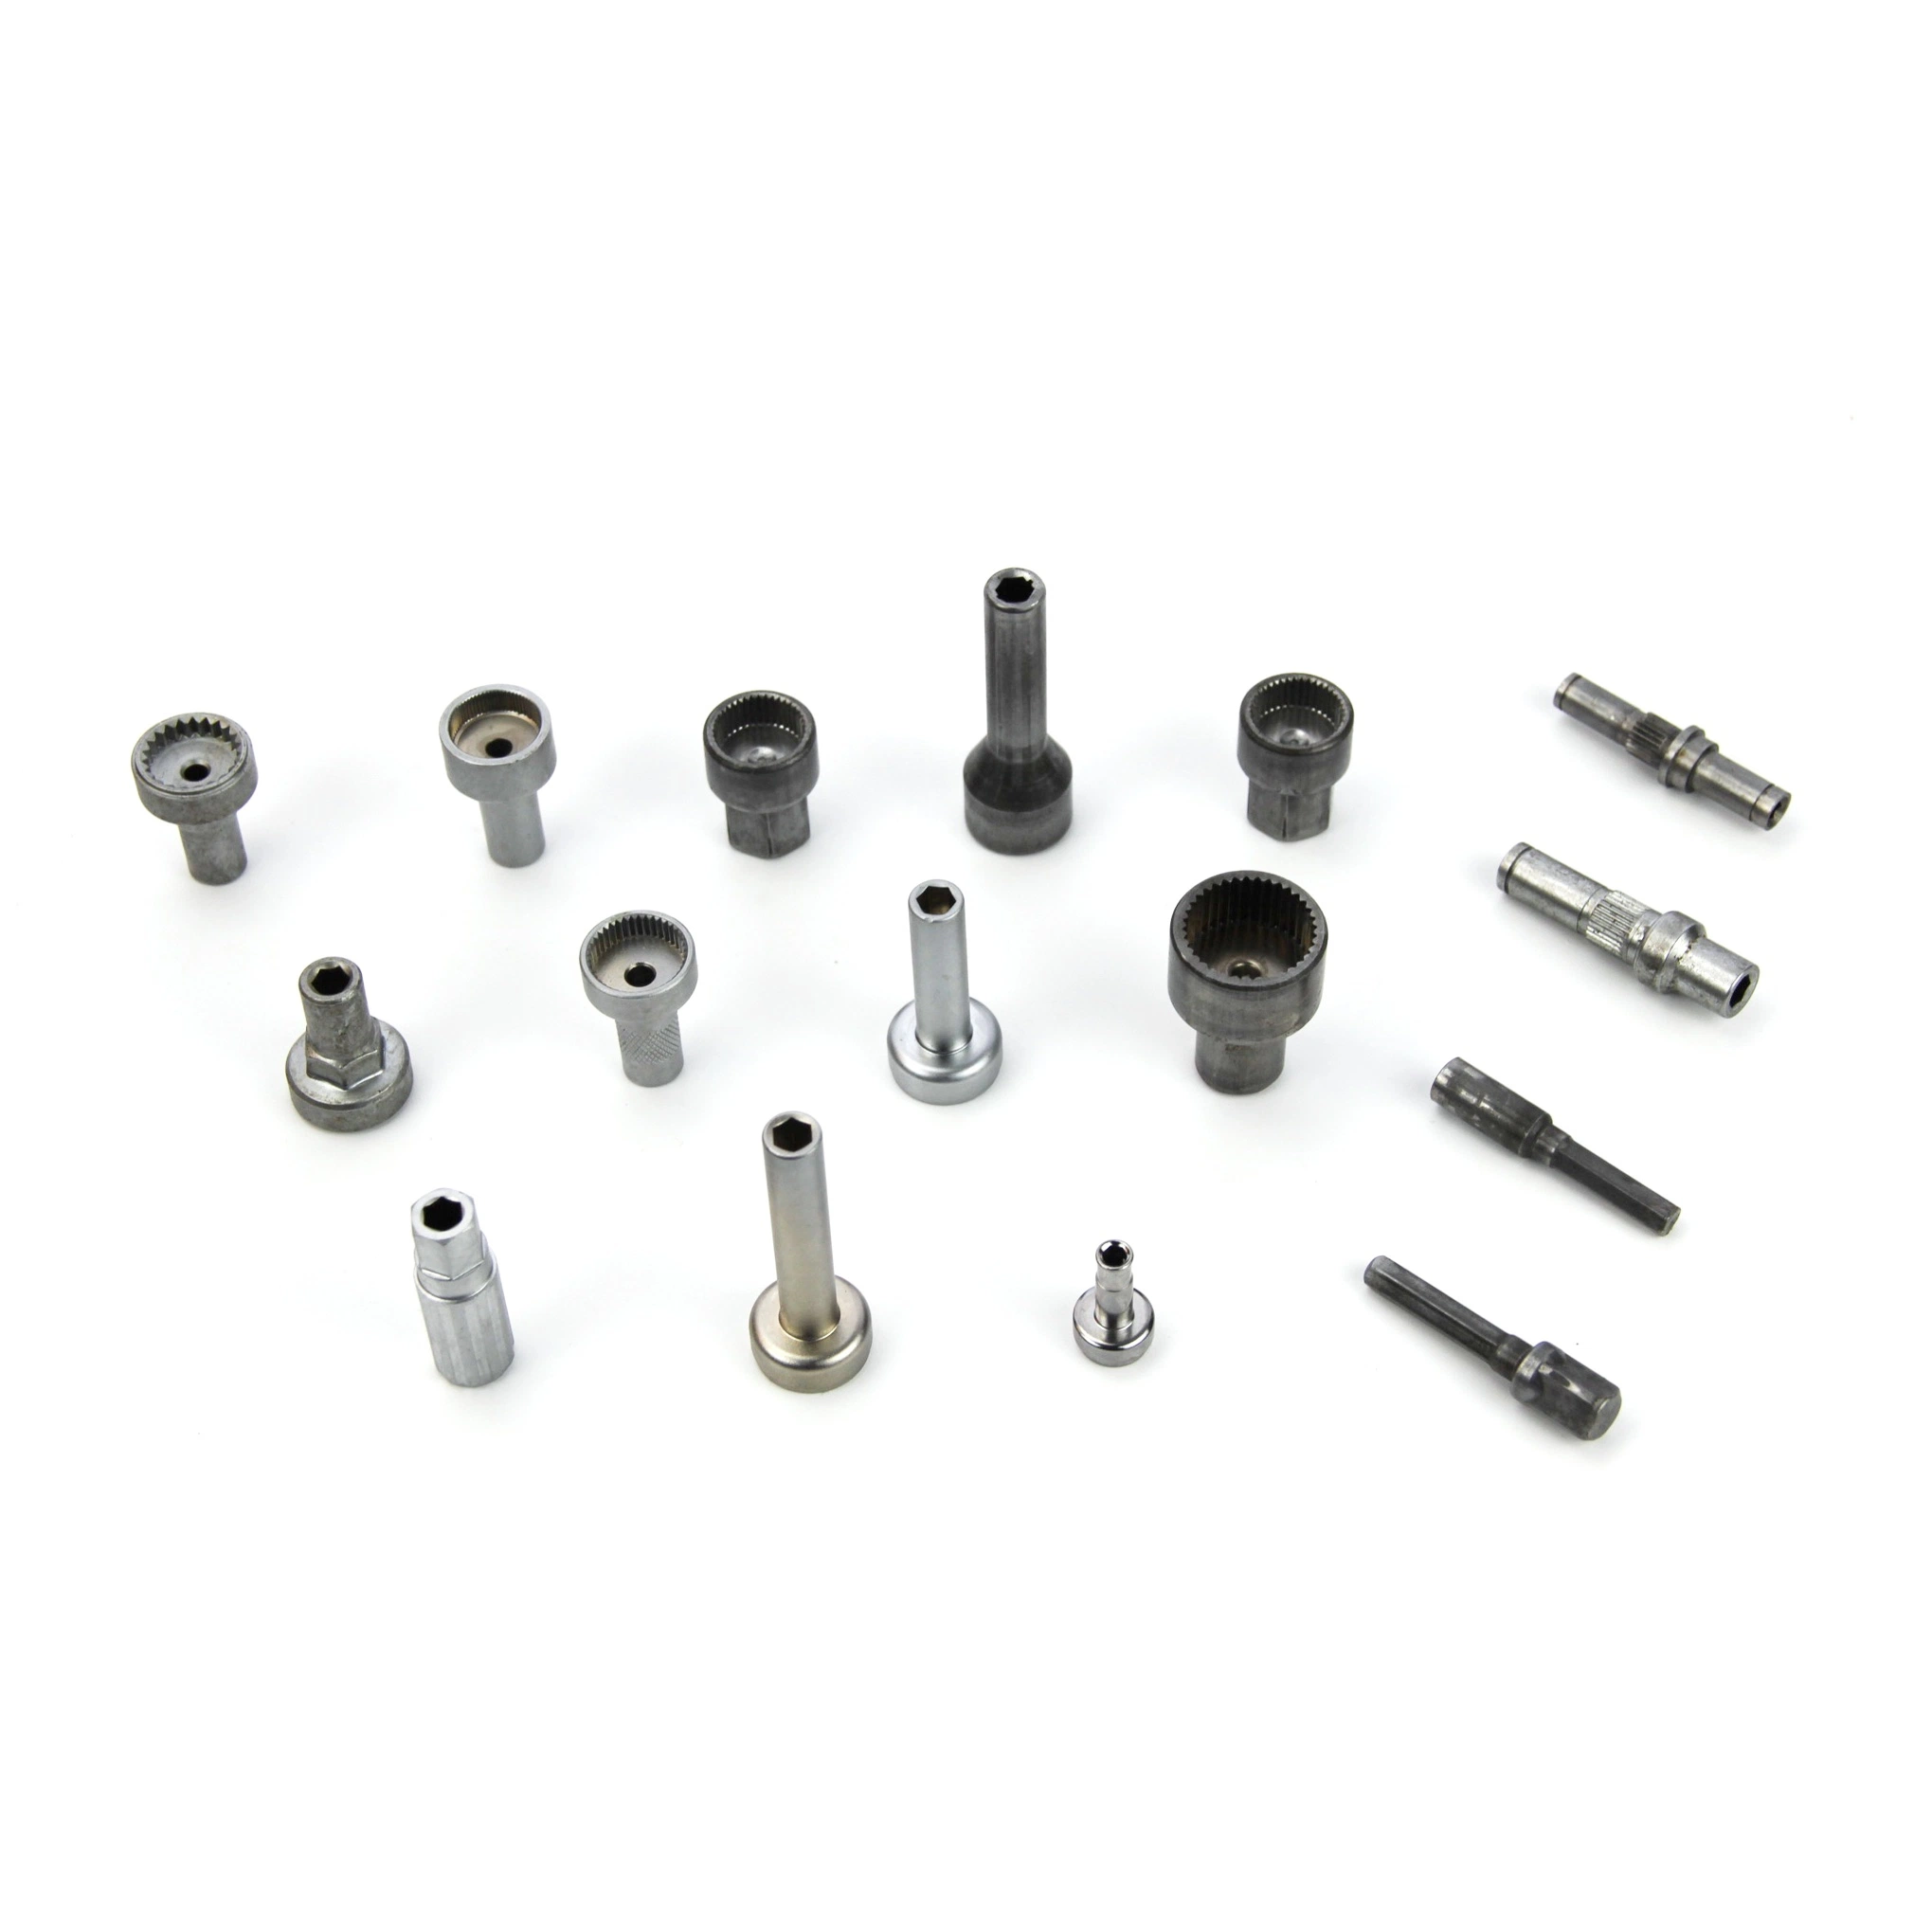 Fitness Equipment Hardware Tools Ratchet Bolt Cold Heading Fasteners